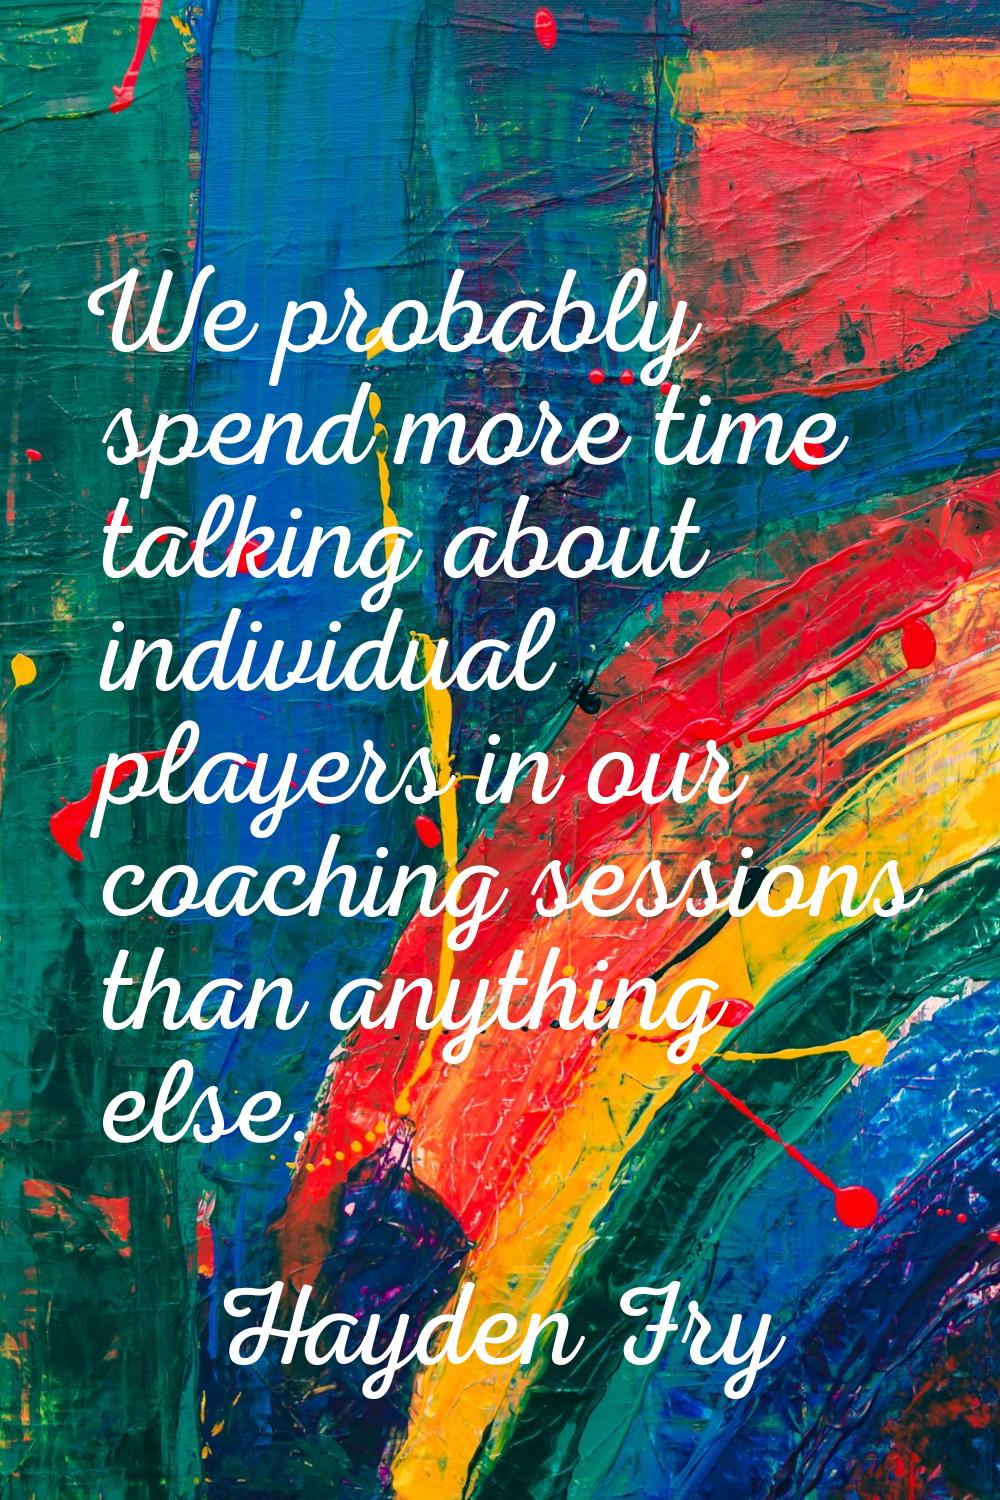 We probably spend more time talking about individual players in our coaching sessions than anything